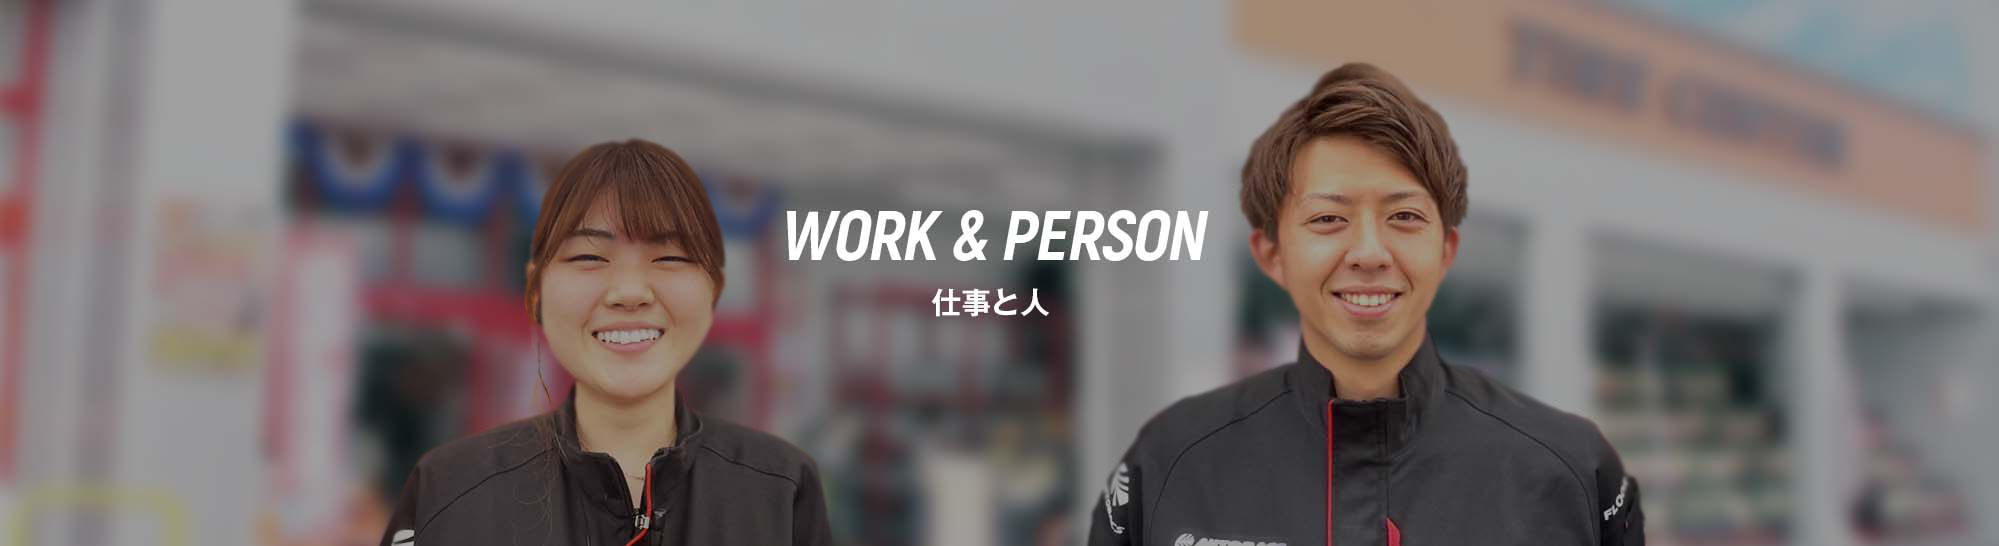 WORK&PERSON　仕事と人